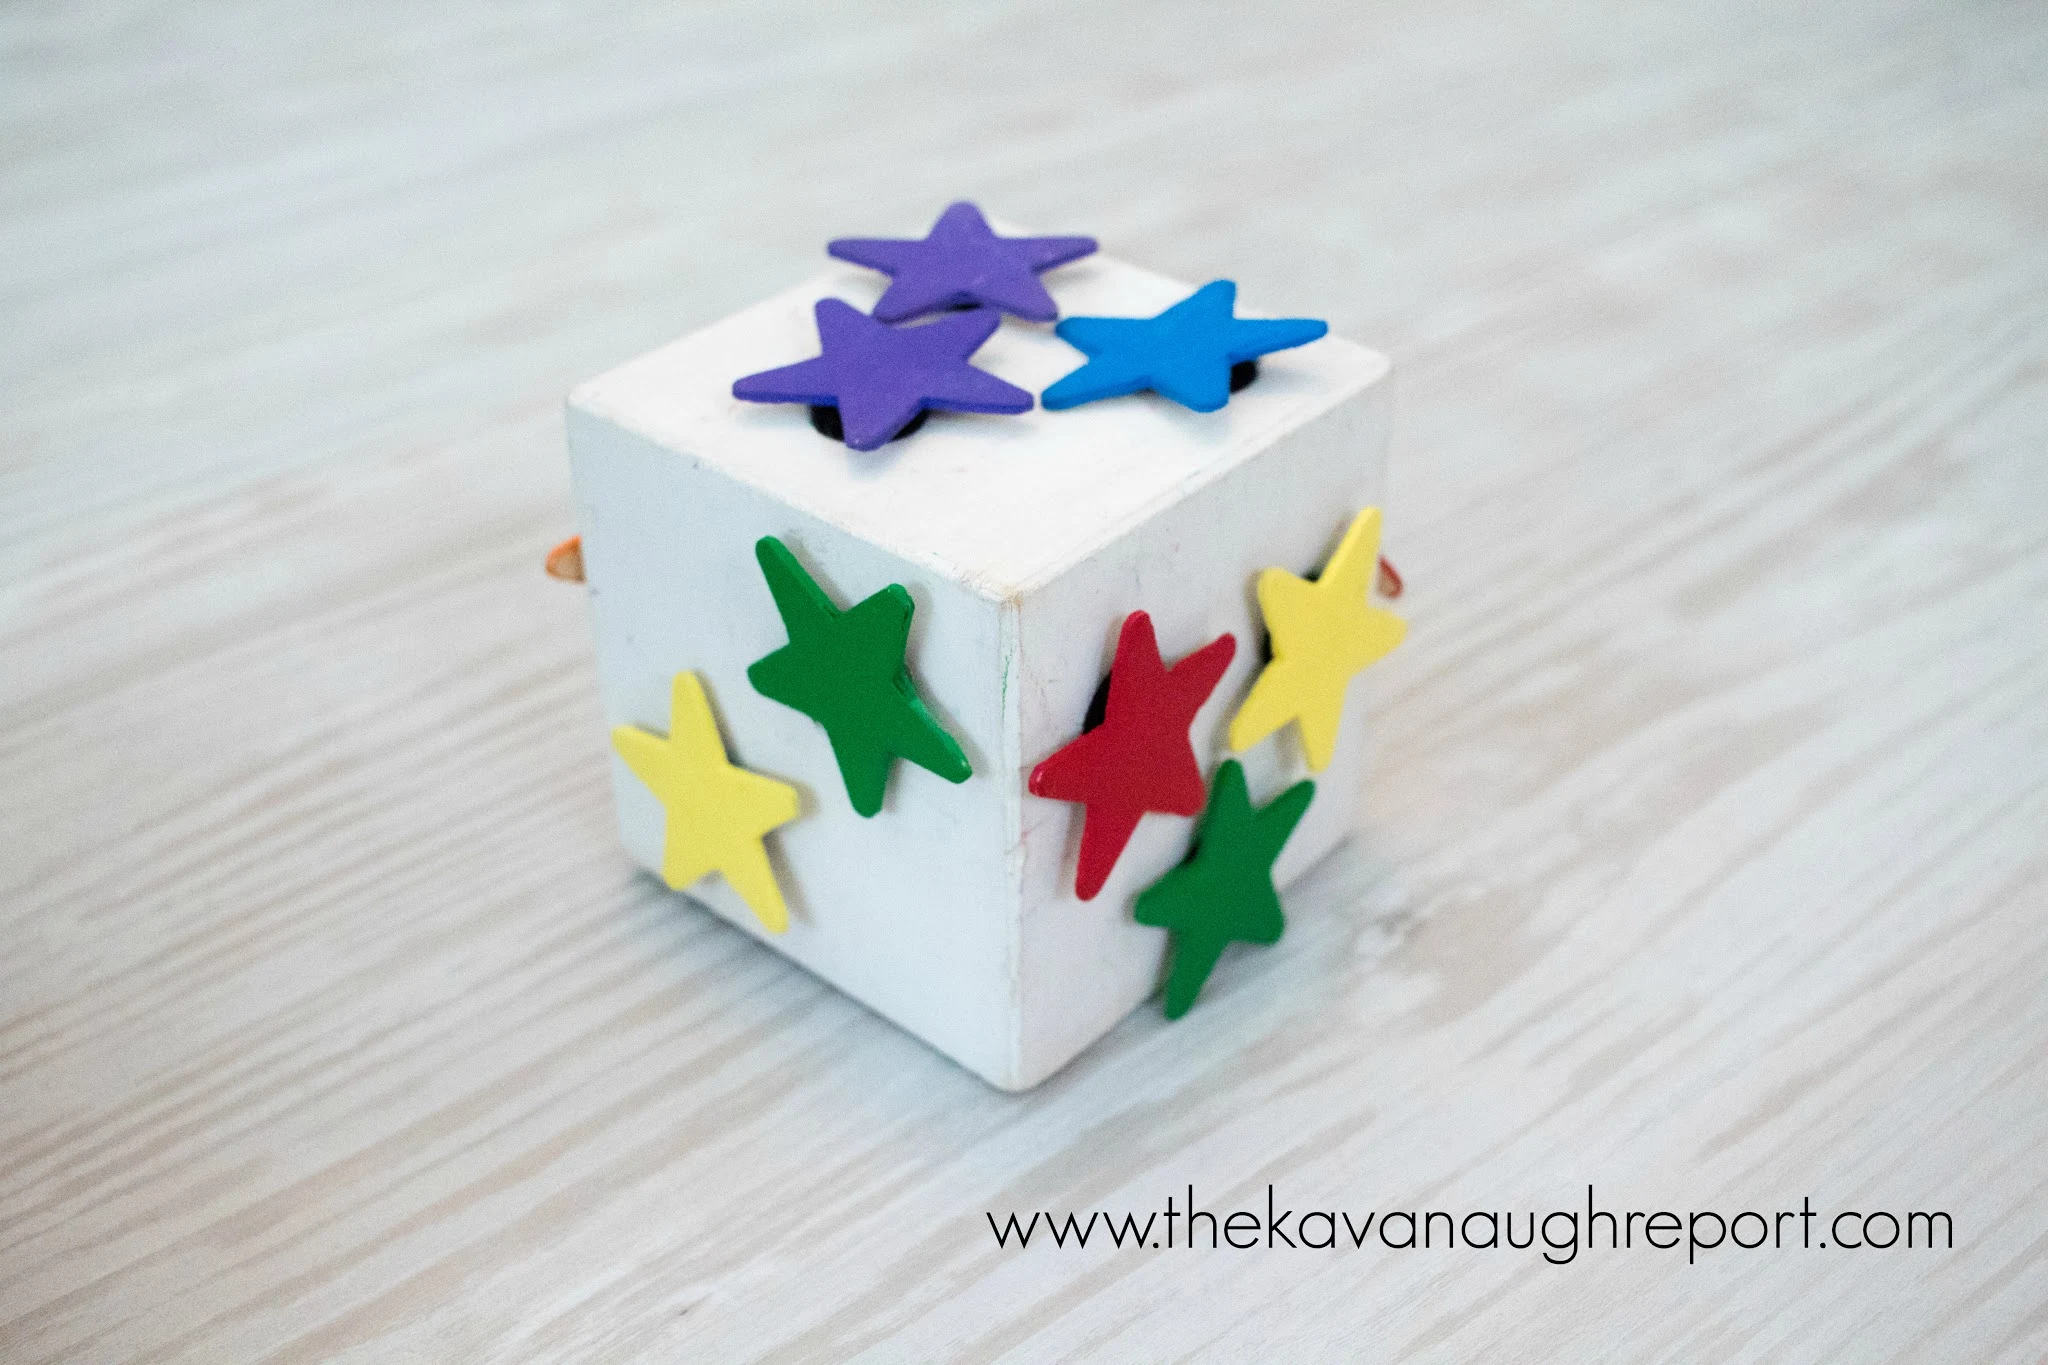 A DIY wooden block toy sits on the floor. It is painted white and covered with colorful wooden stars waiting for a toddler to play with it.